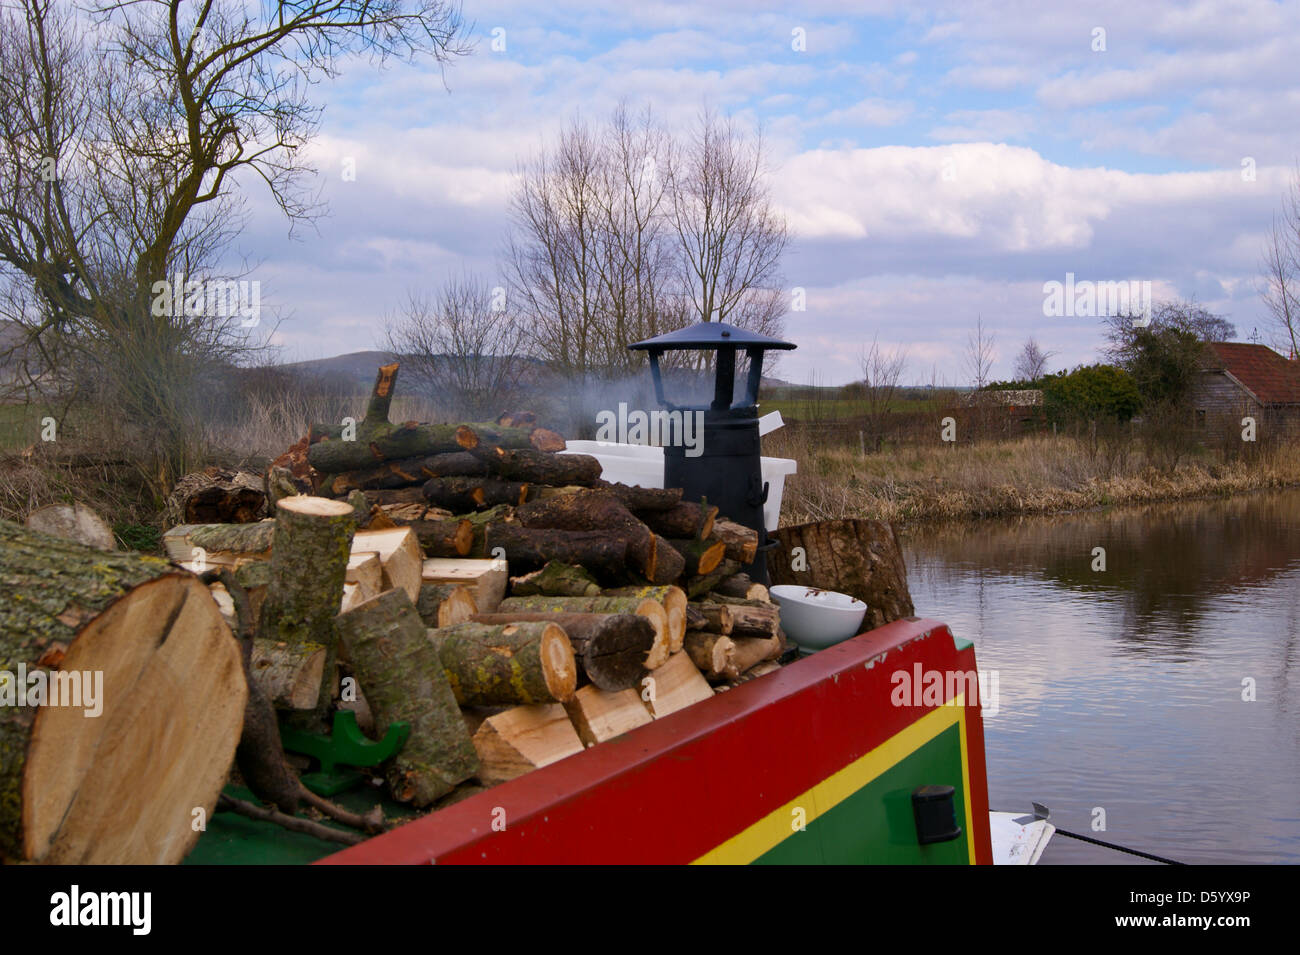 Narrowboats at the Barge Inn on the Kennet & Avon Canal,  Honey Street, Alton Priors, Wiltshire, England Stock Photo